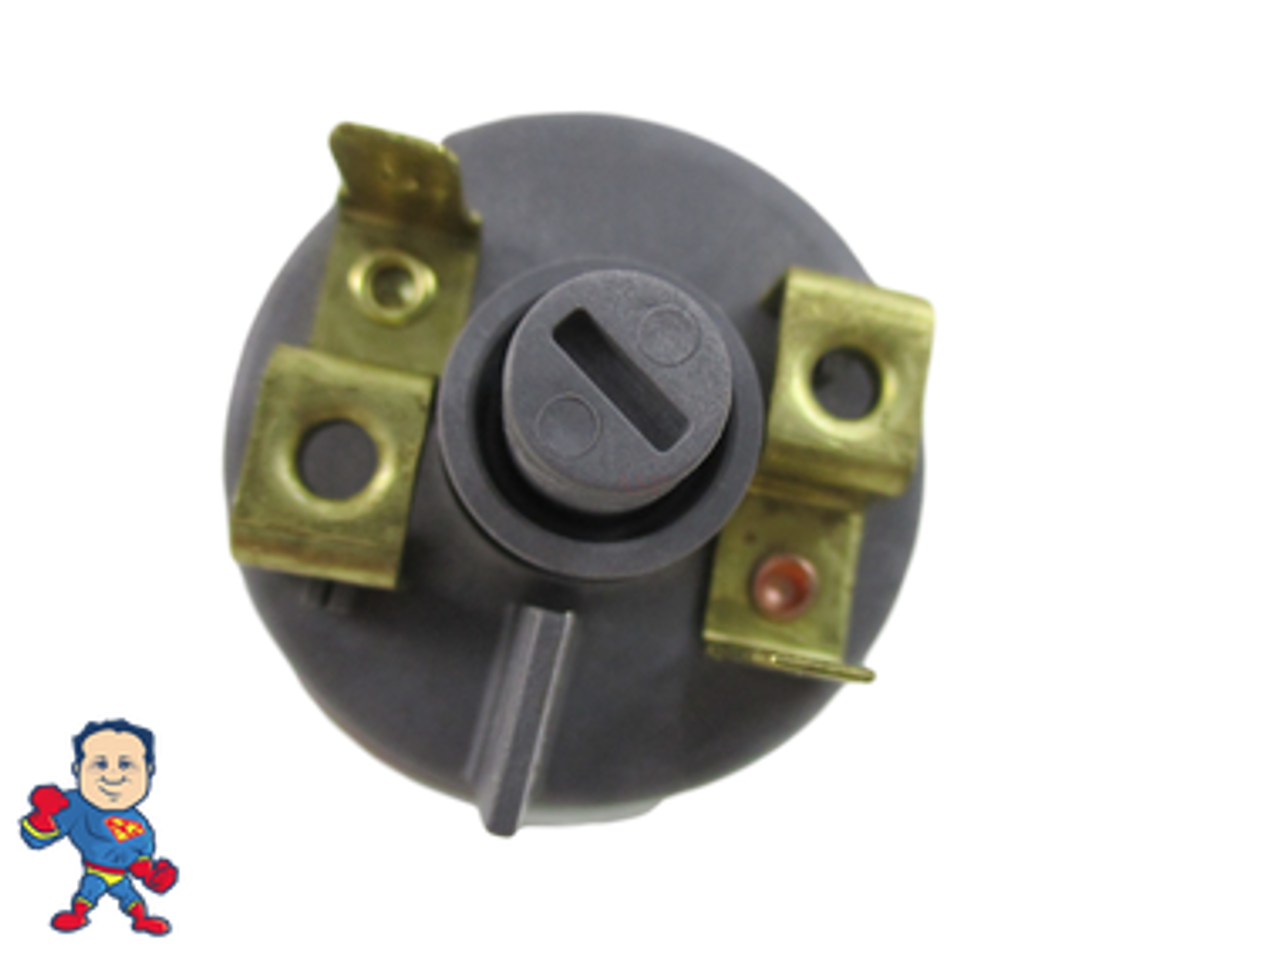 Pressure Switch 1/8" mpt 1 Amp Hot Tub Spa Part Universal Fits Most Applications